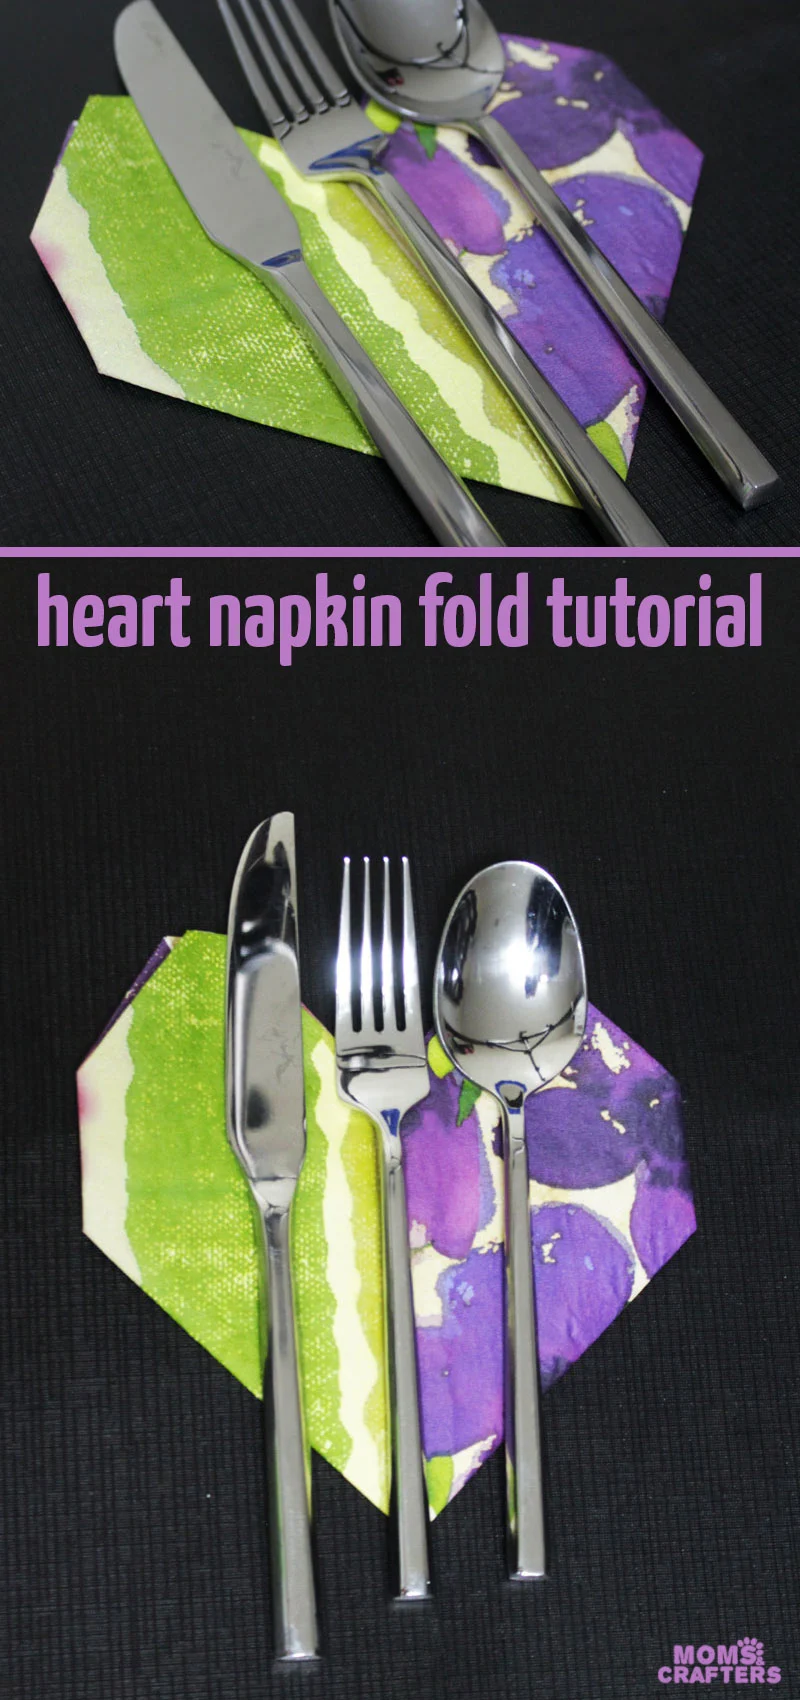  This heart napkin fold tutorial is perfect for Valentine's day, but it's also great for any time you want to set a romantic table, or just for fun! It's a great party idea, for anniversaries, for valentine's day, or for a spouse's birthday party.